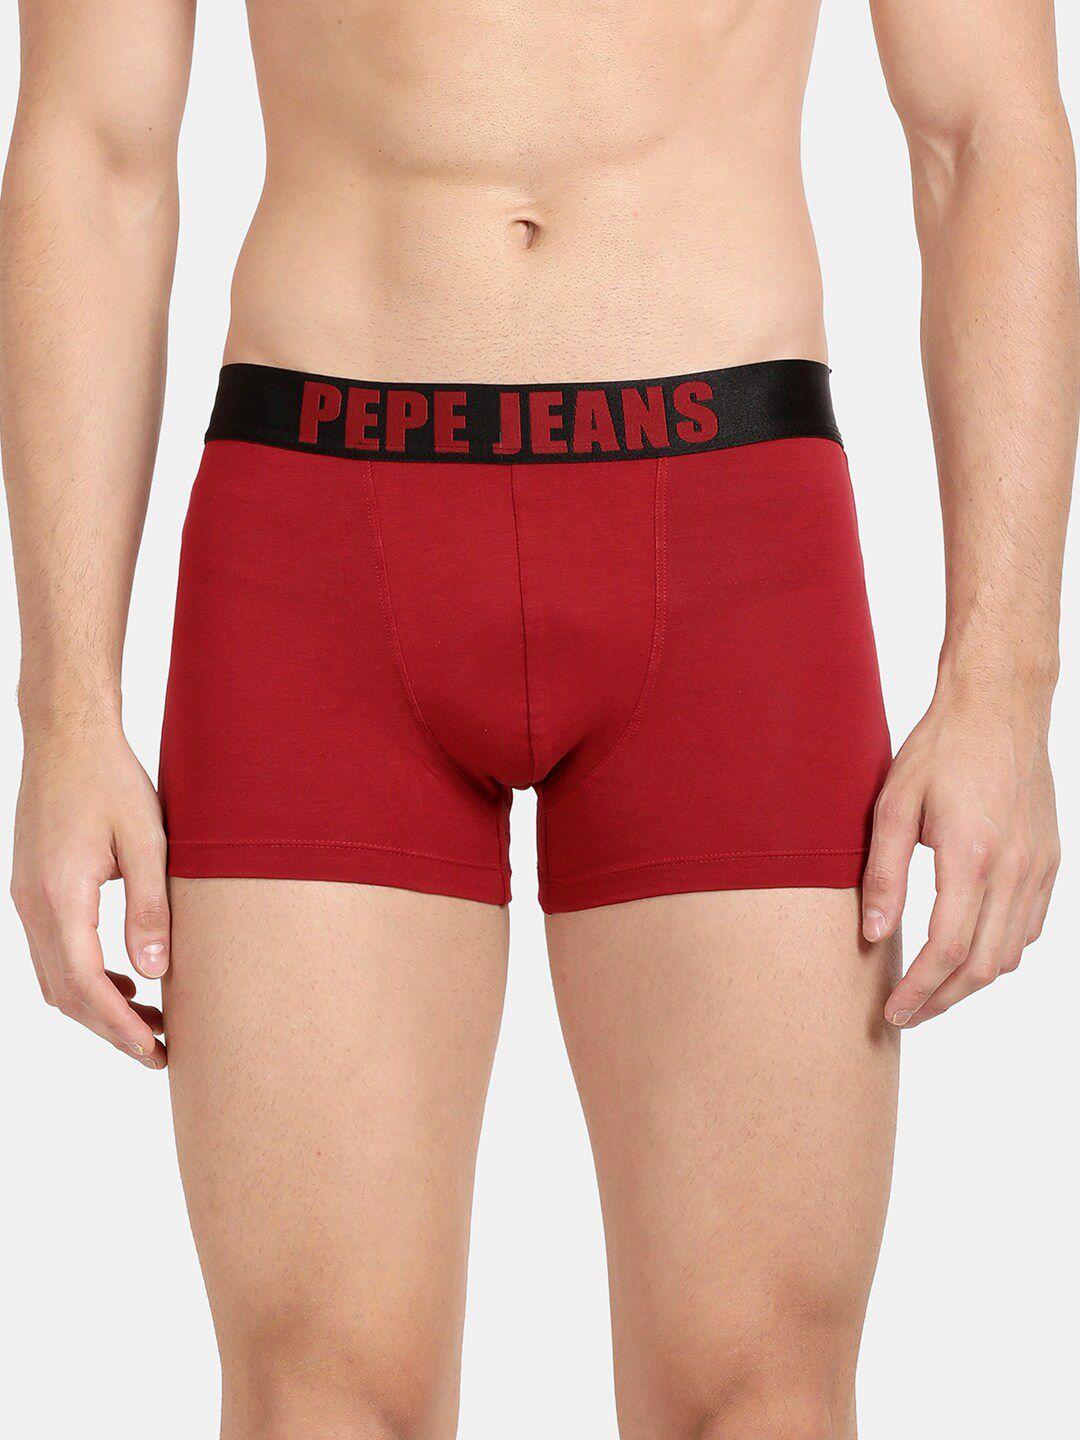 pepe-jeans-men-red-solid-cotton-trunk